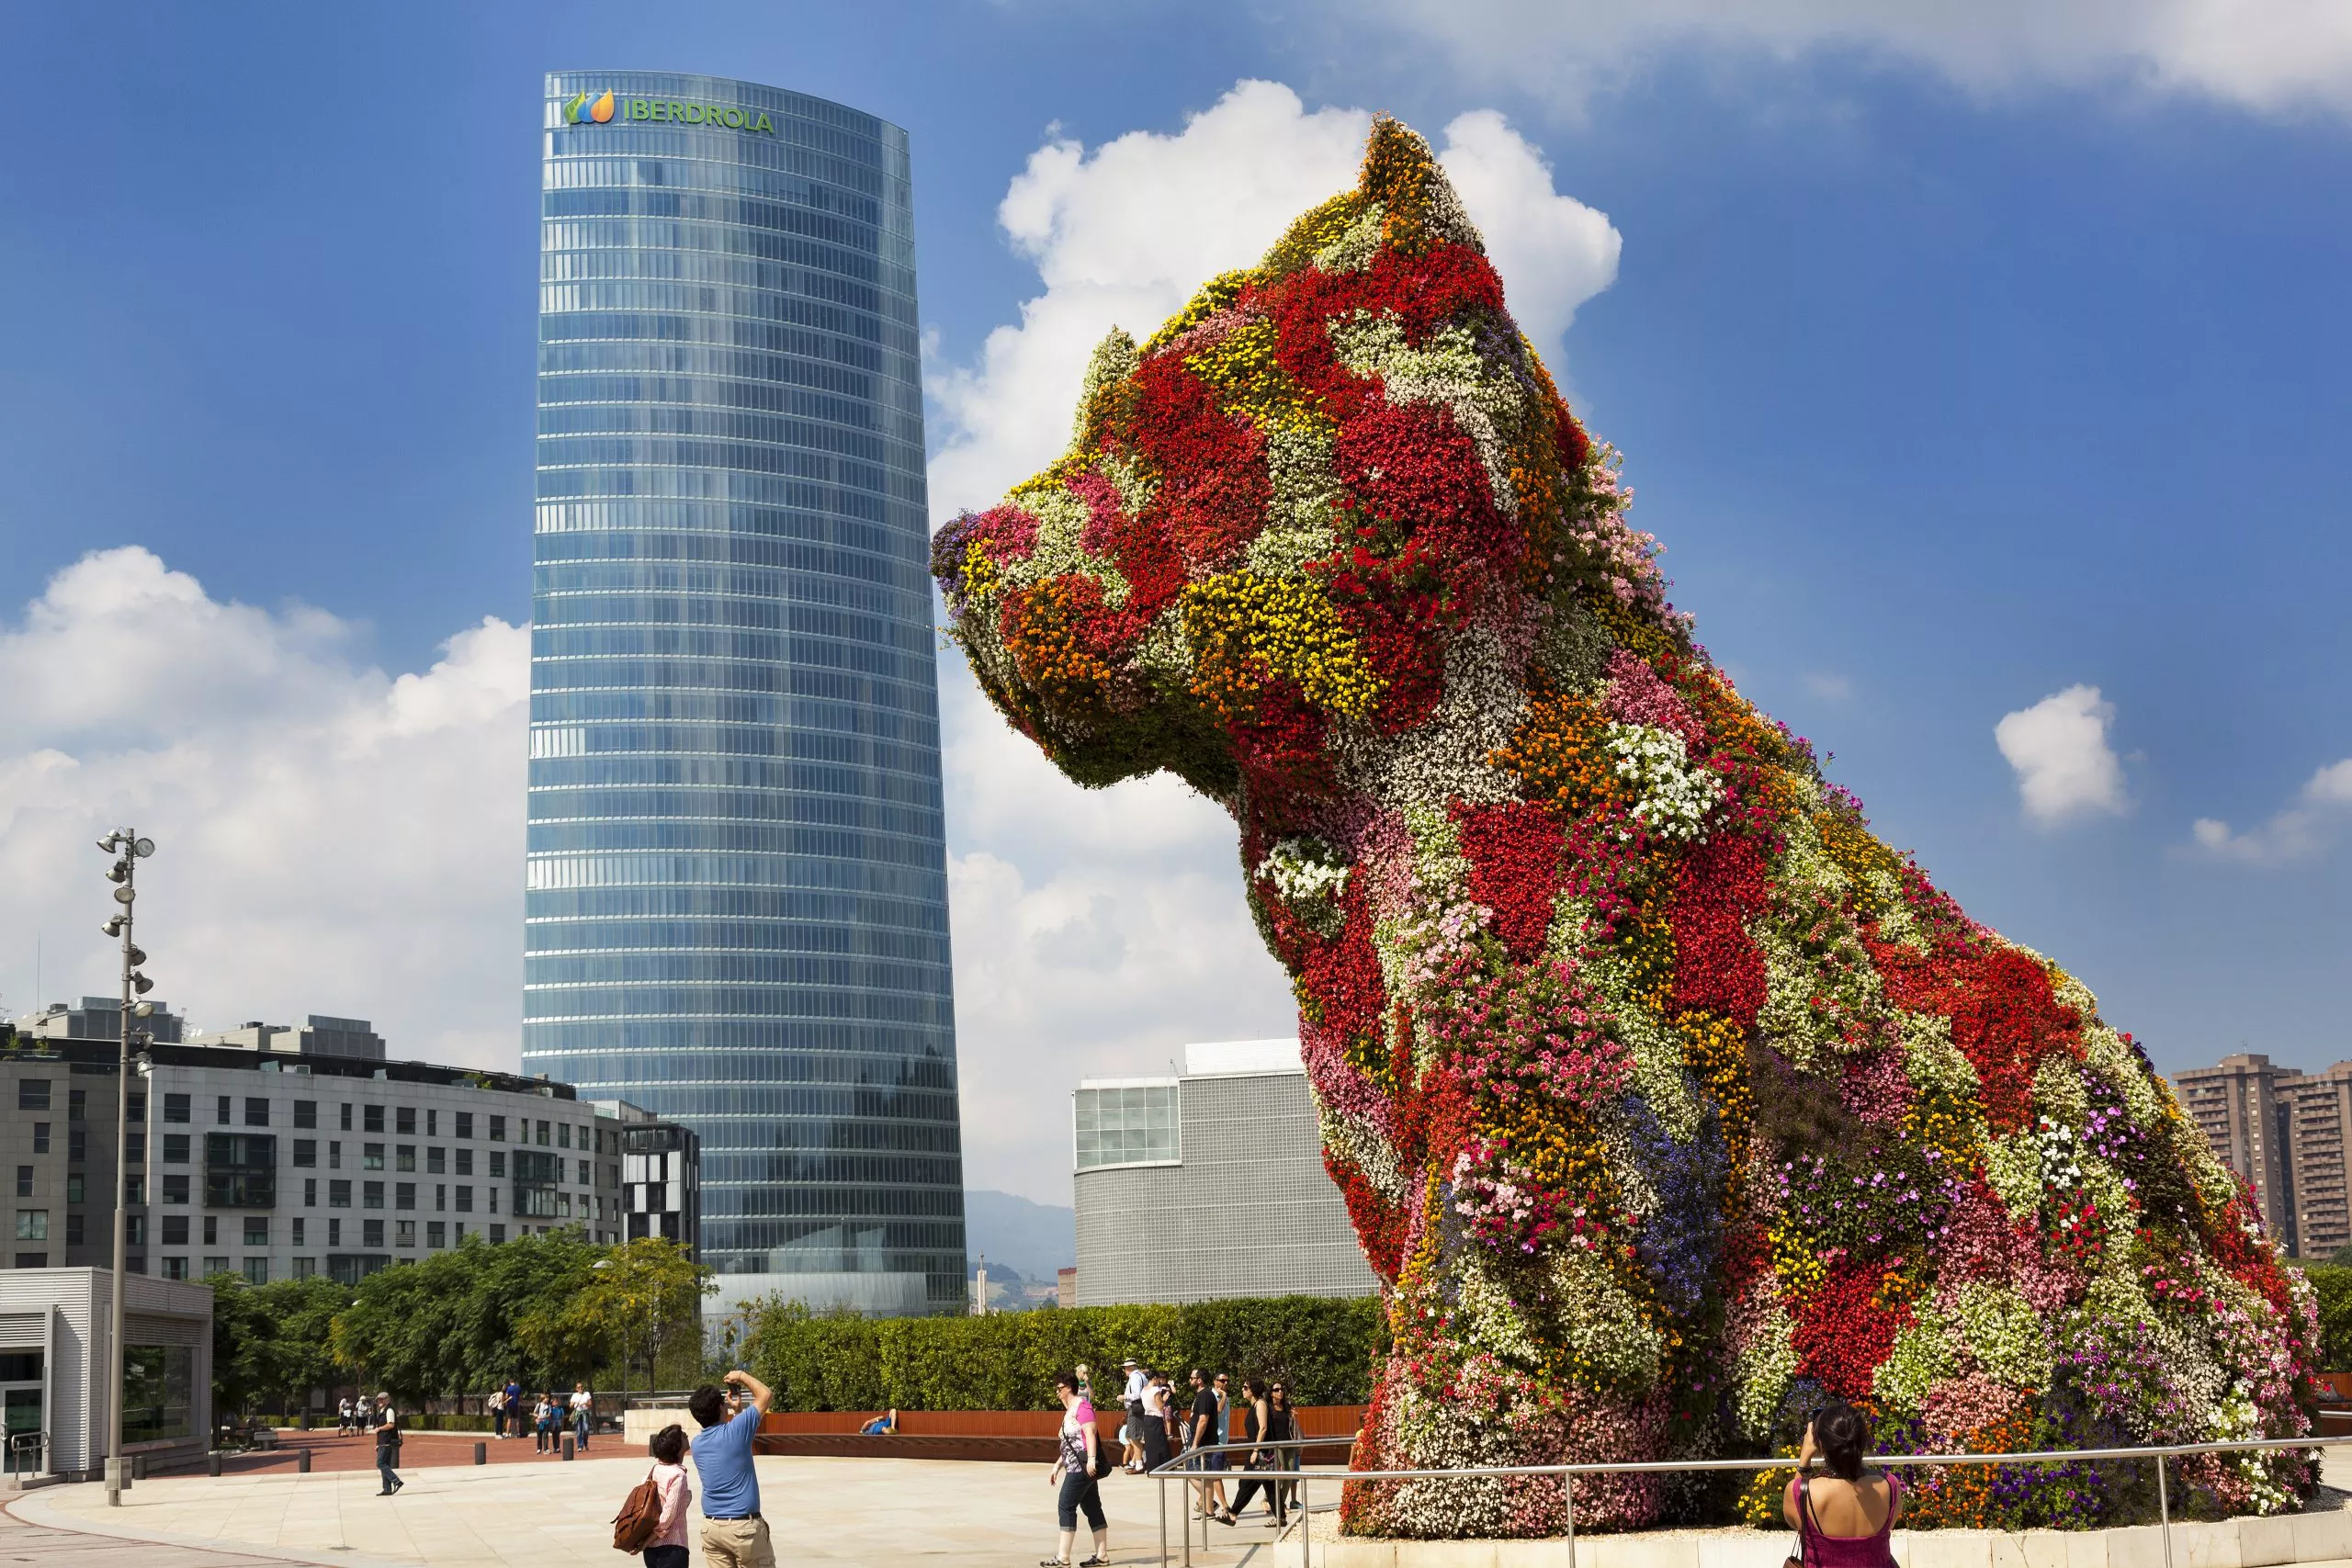 Bilbao, Spain - August 30, 2013: Tourists photographing the big floral dog 'Puppy', that is framed as kissing a building; the Iberdrola skyscraper